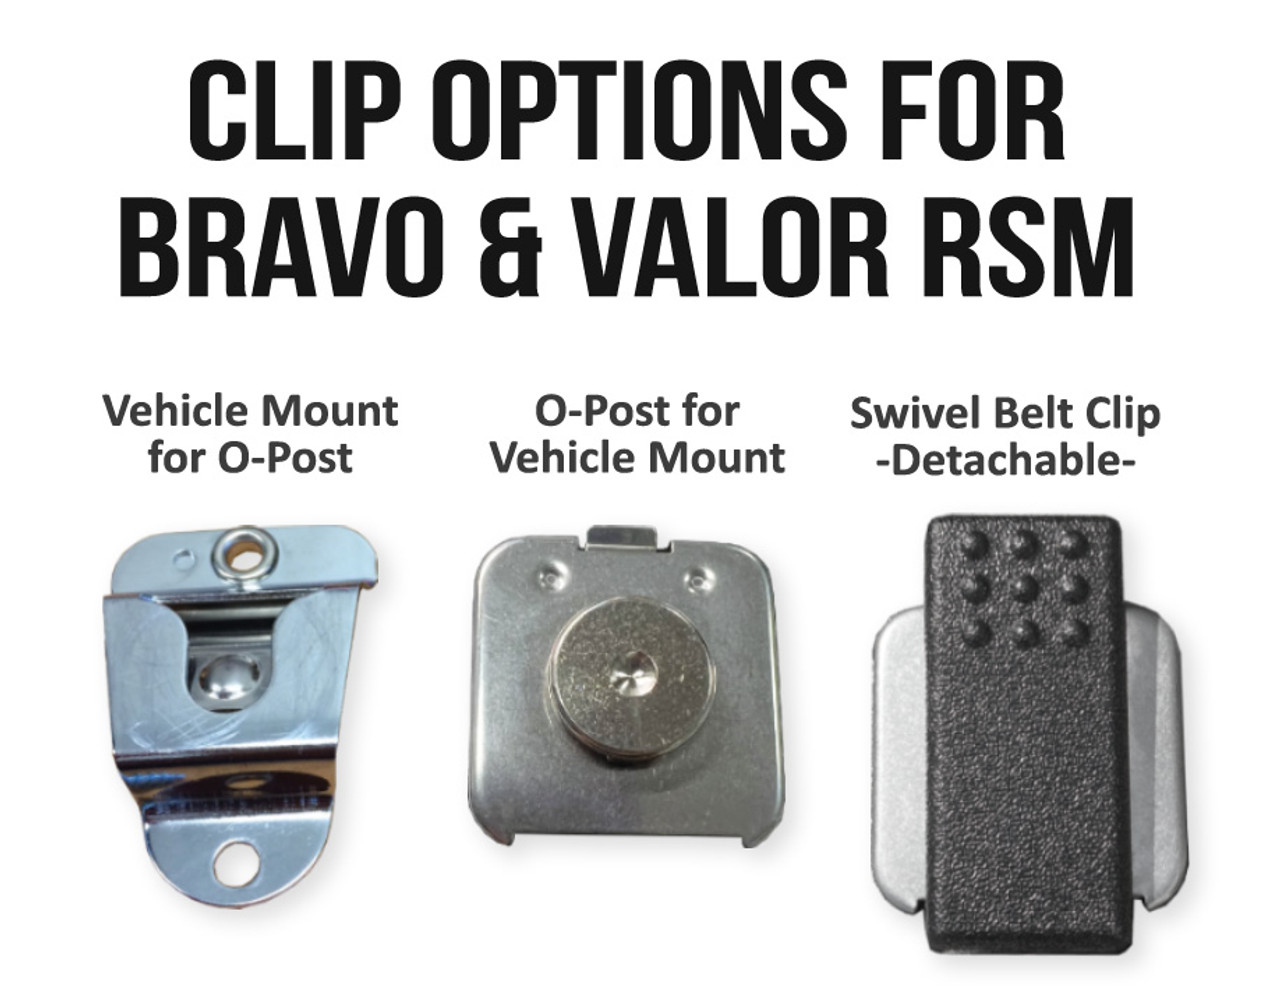 Vehicle Mount for O-Post - 2-Way Radio Accessories